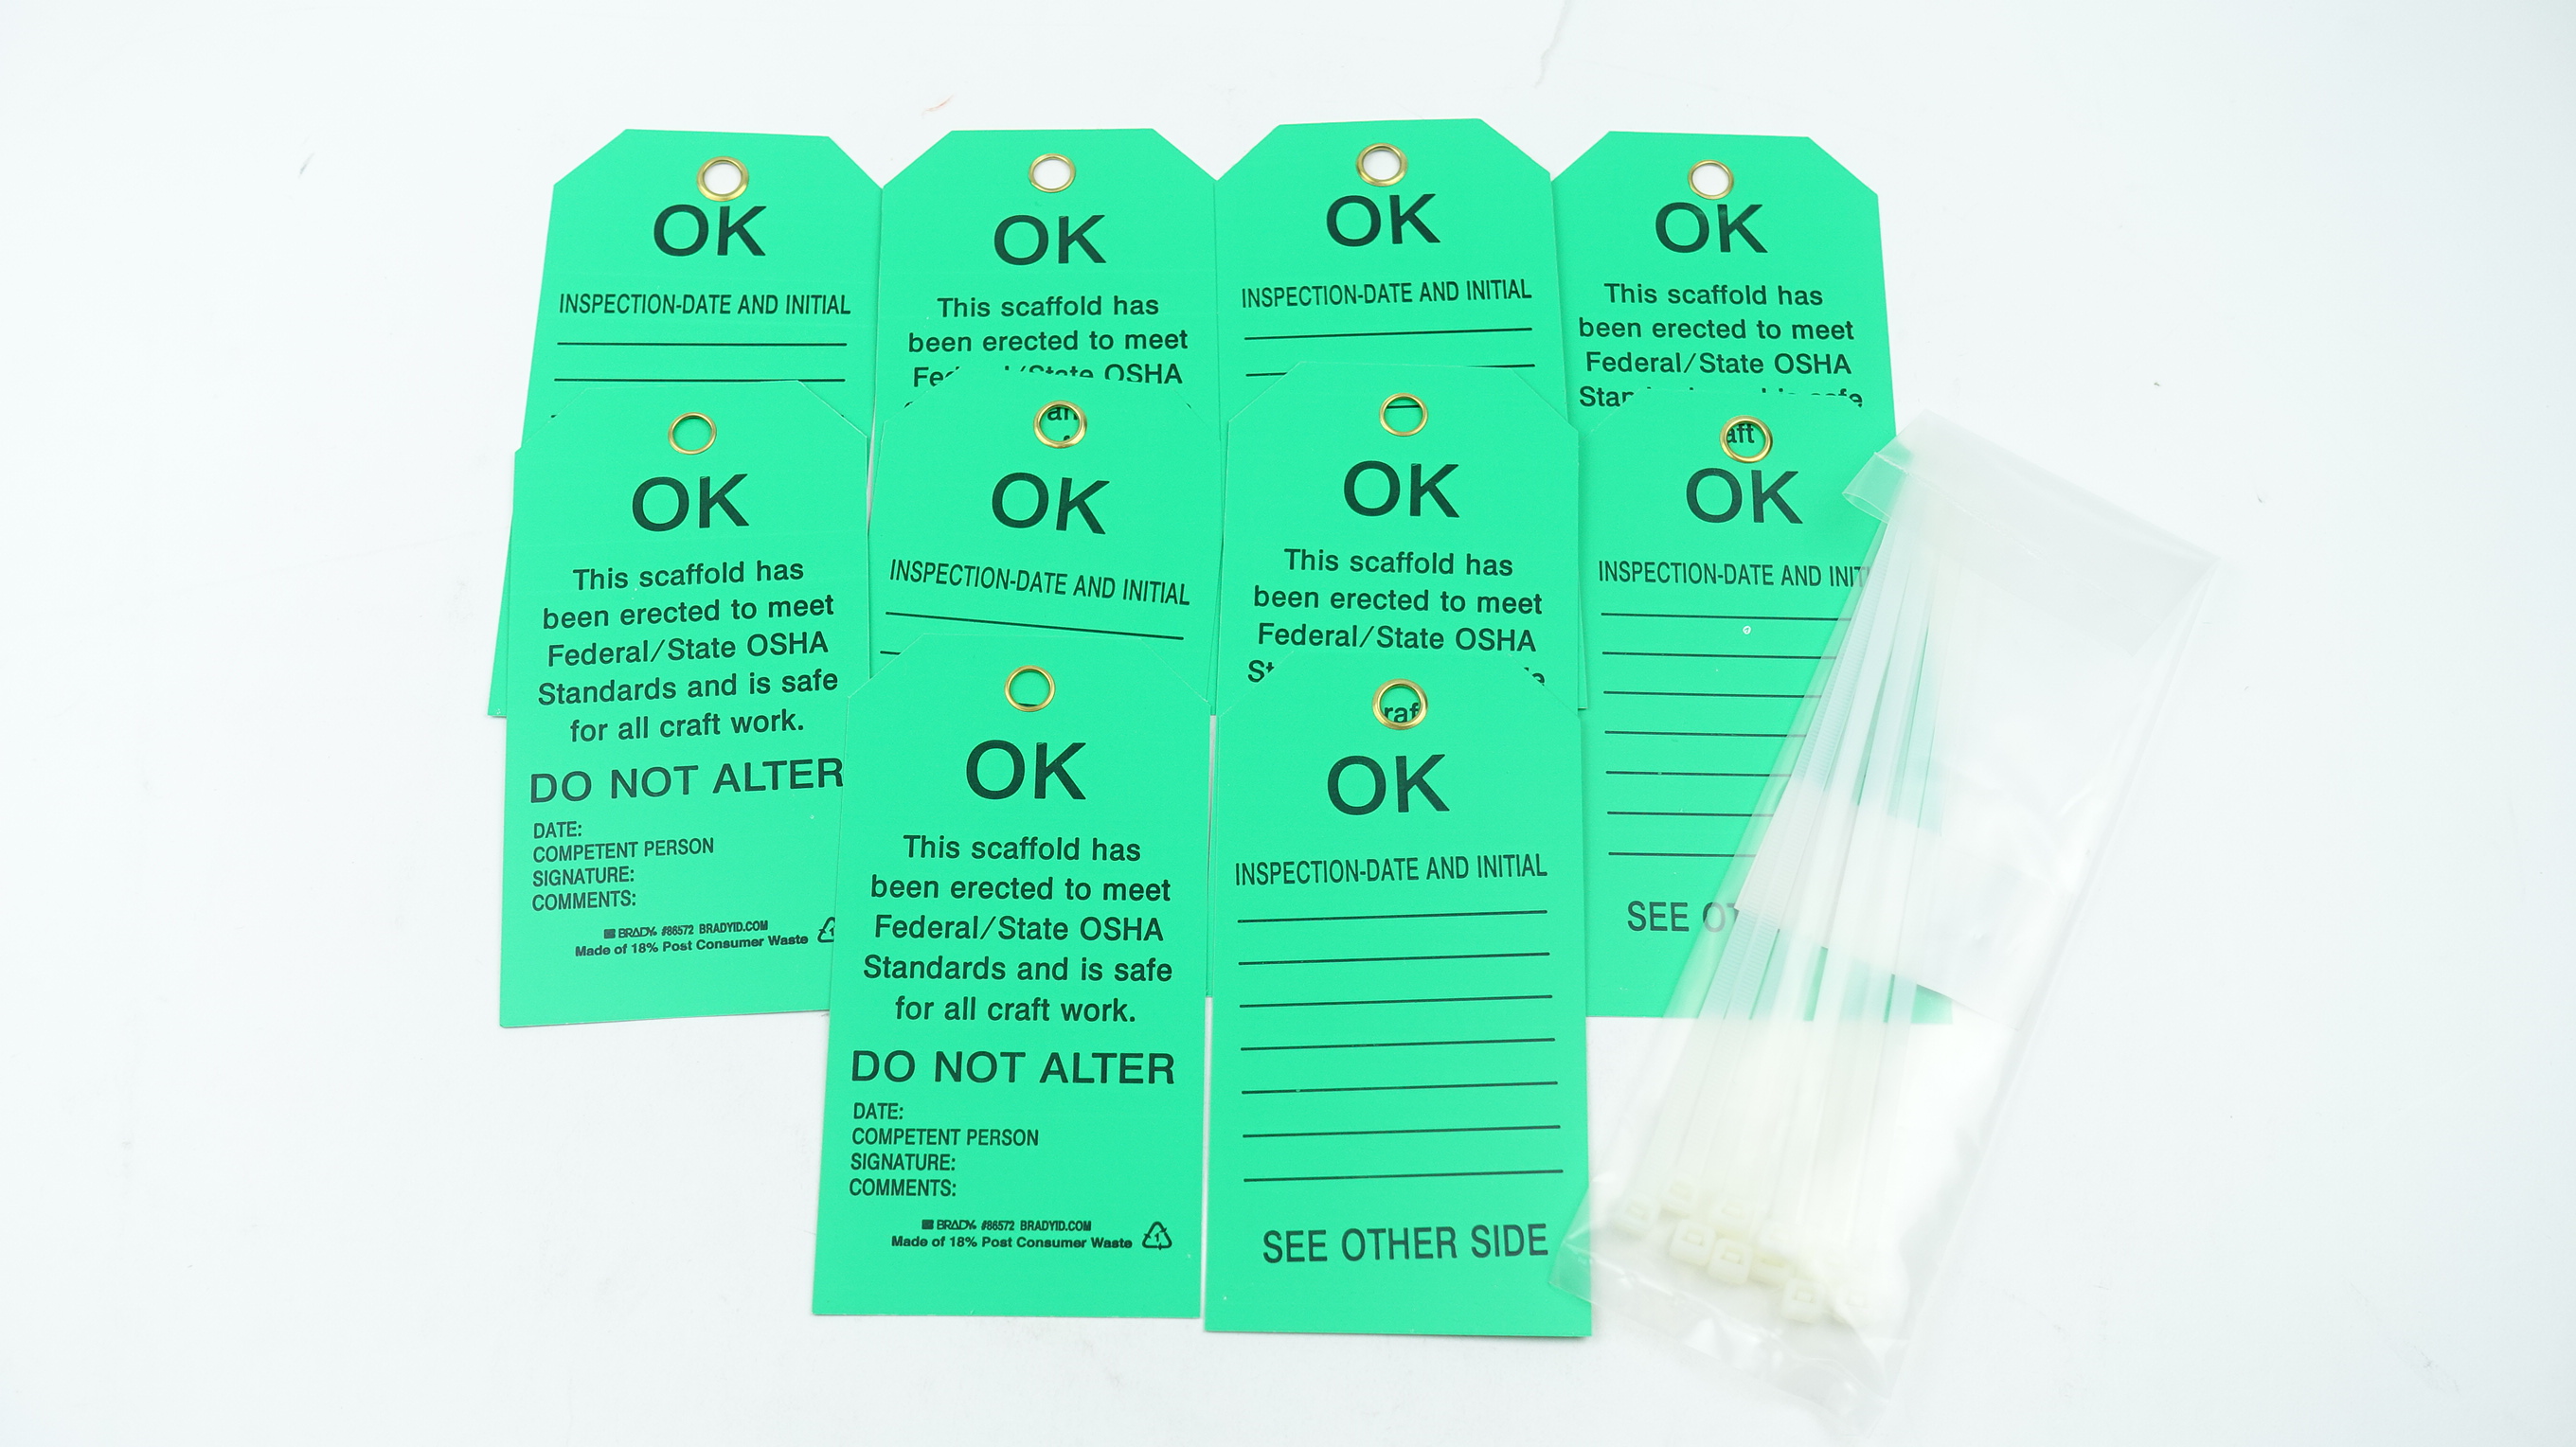 12 Packs of 10 Tags 86572 Brady Scaffolding Green with Zip Ties 120 Tags Total - image 1